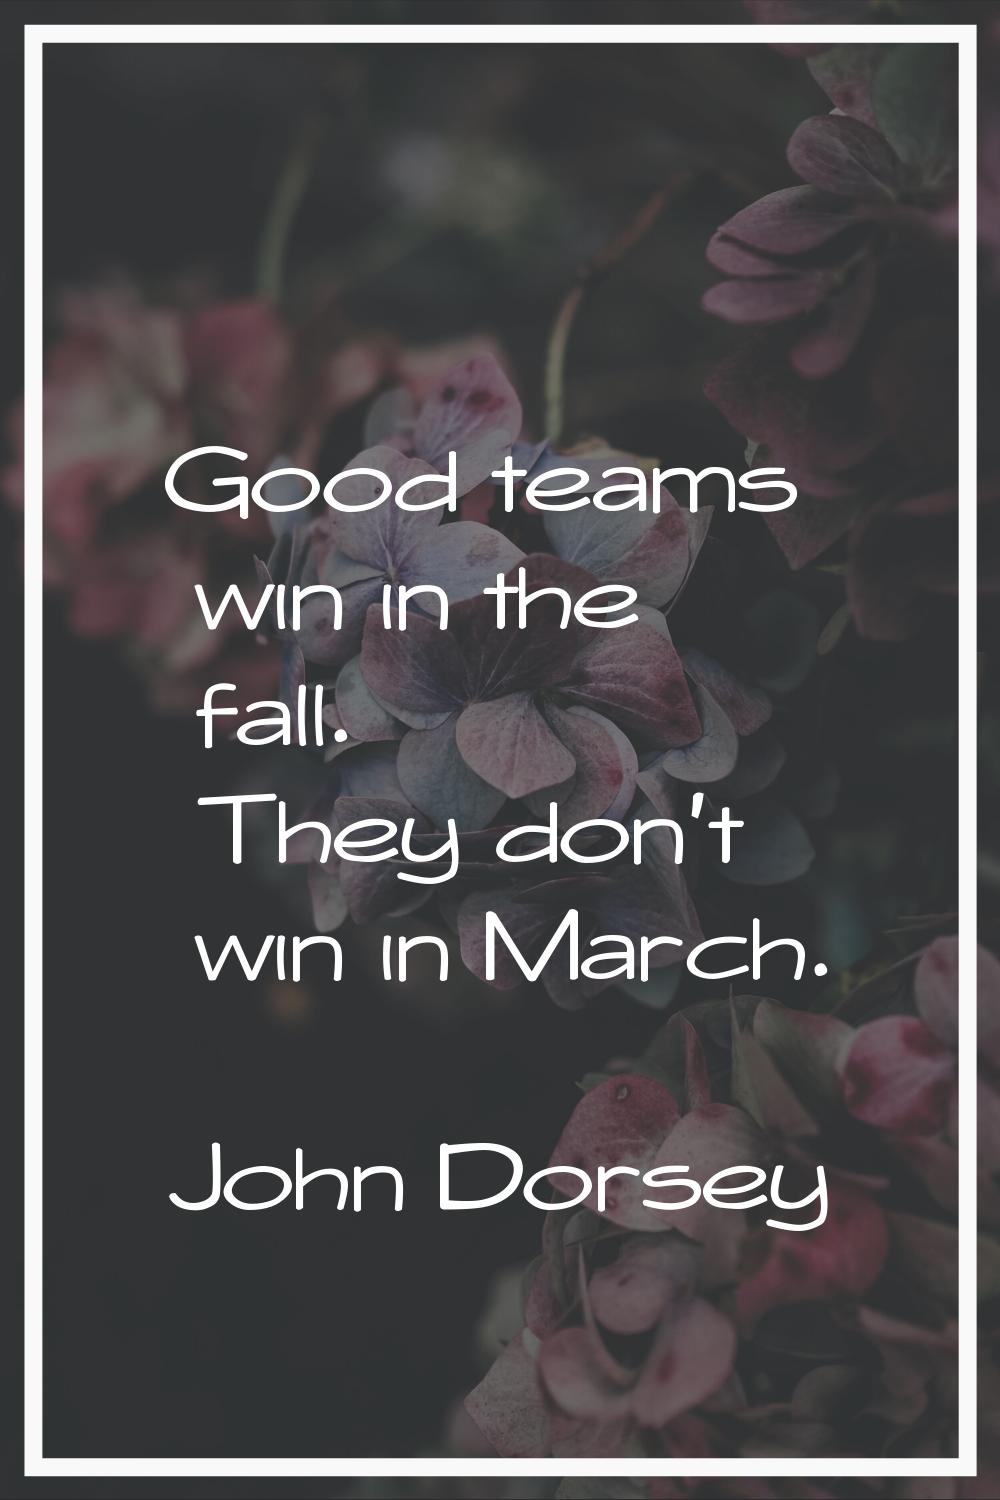 Good teams win in the fall. They don't win in March.